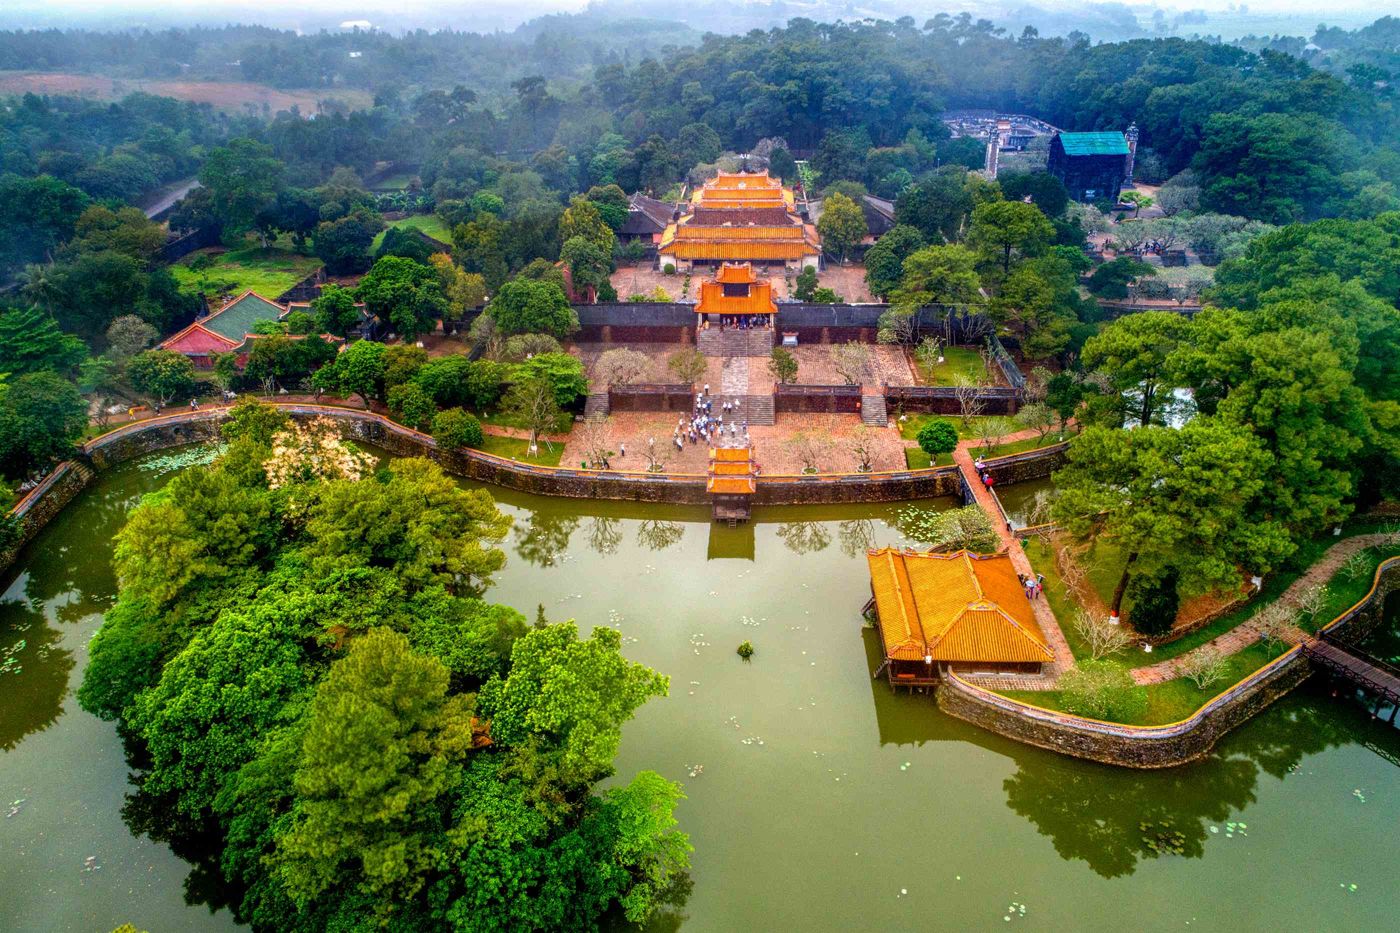 Admire the ancient city Hue from above